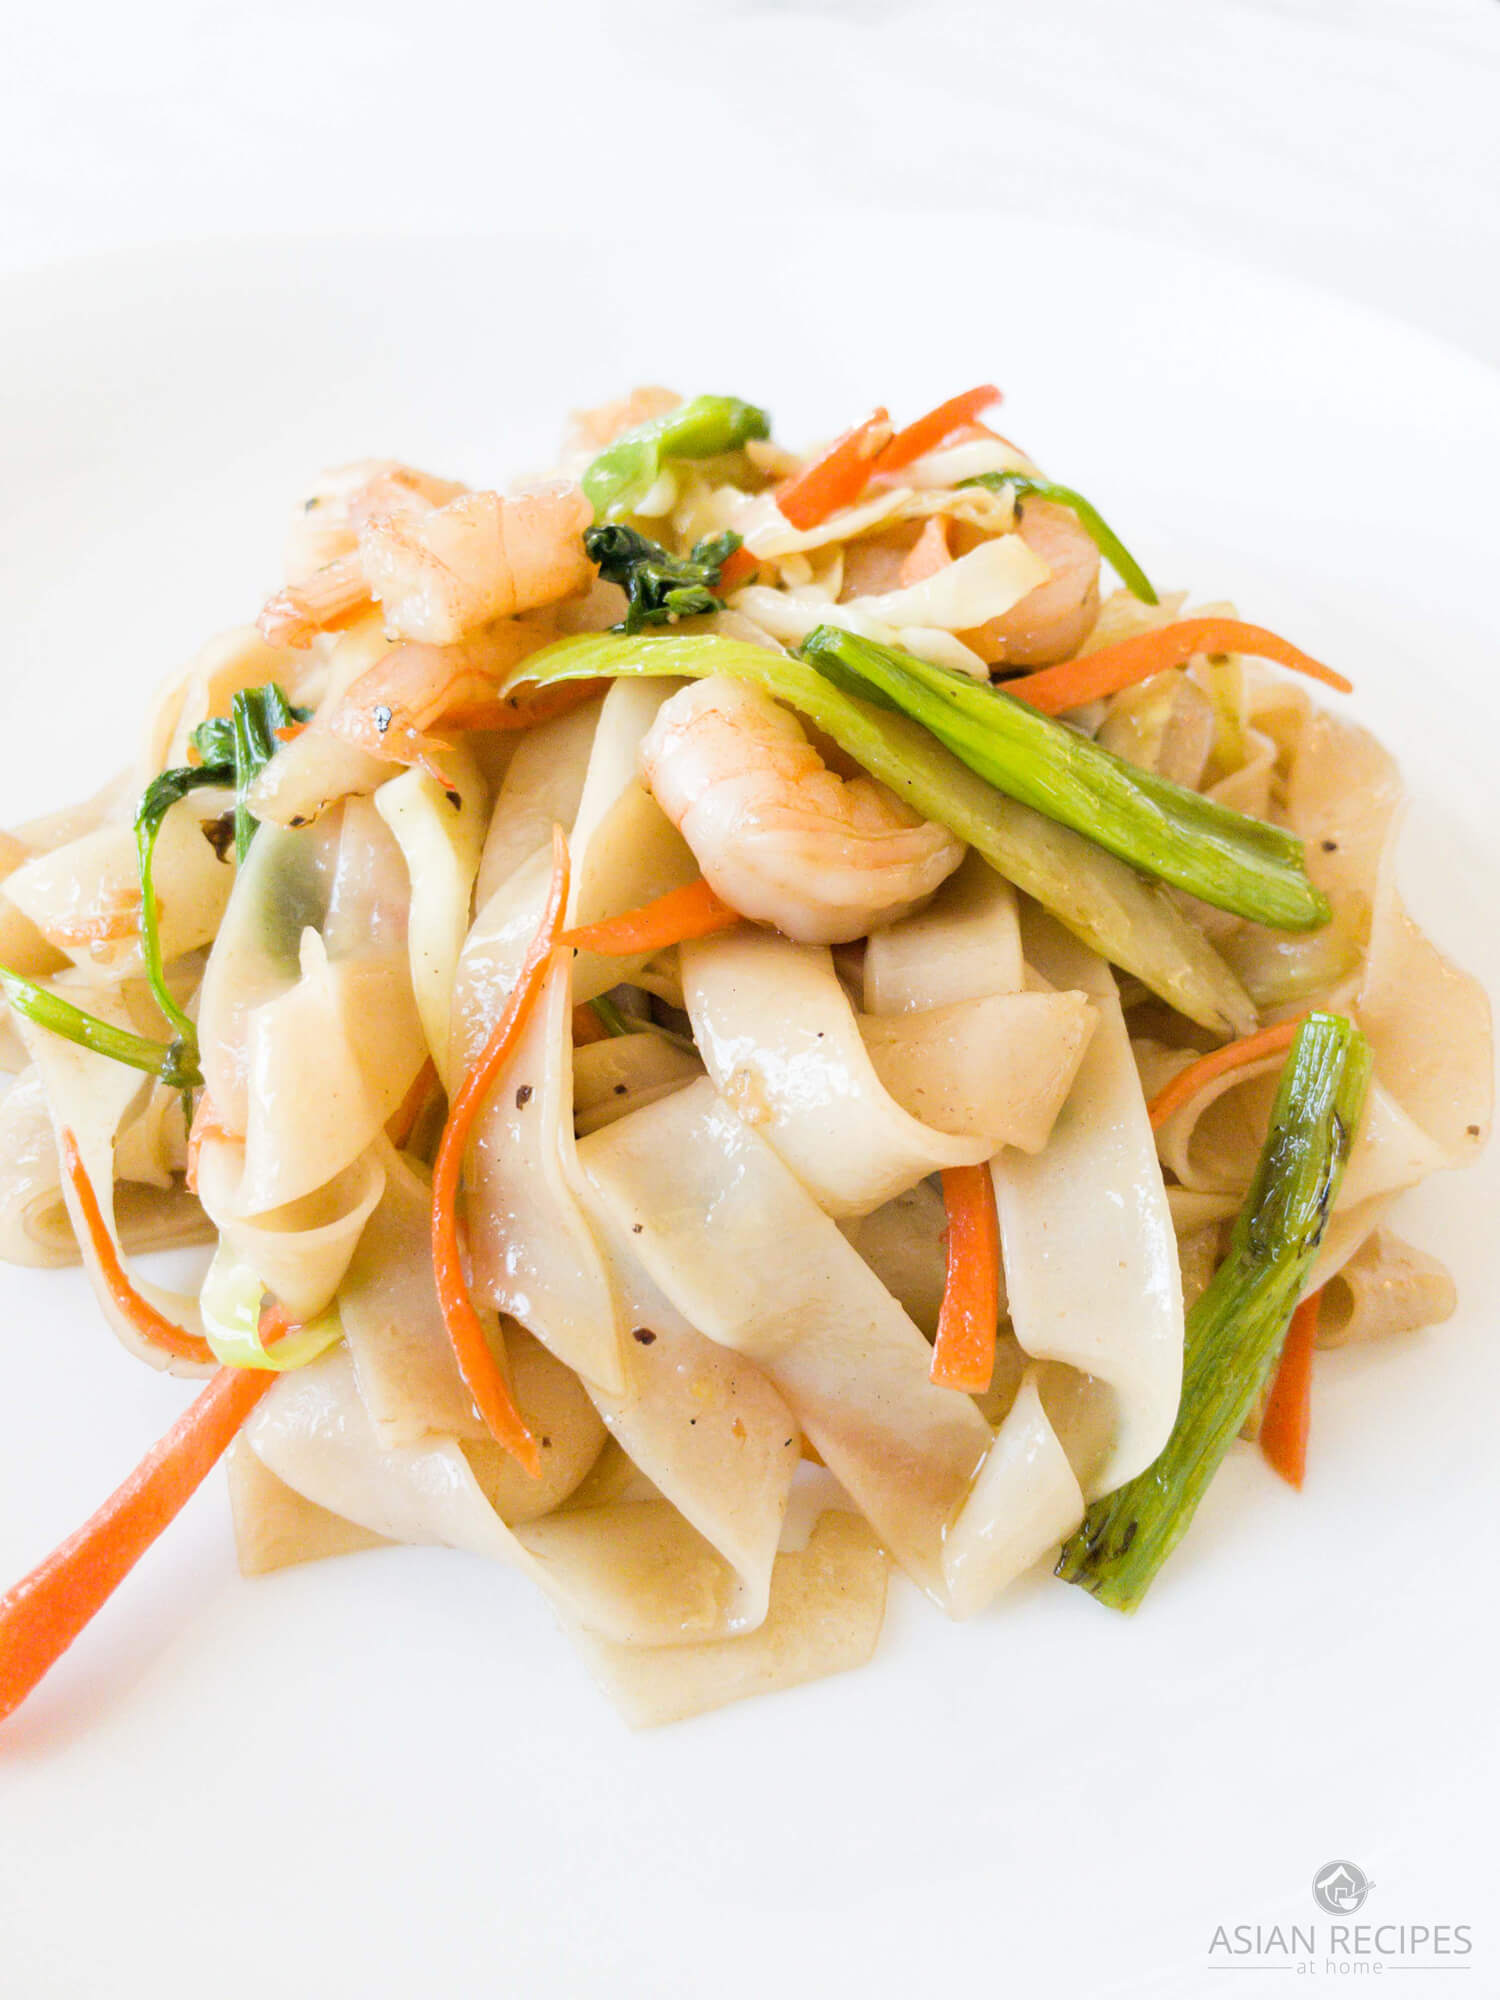 This easy stir-fried rice noodle recipe is bursting with Asian flavors and delicious shrimp.